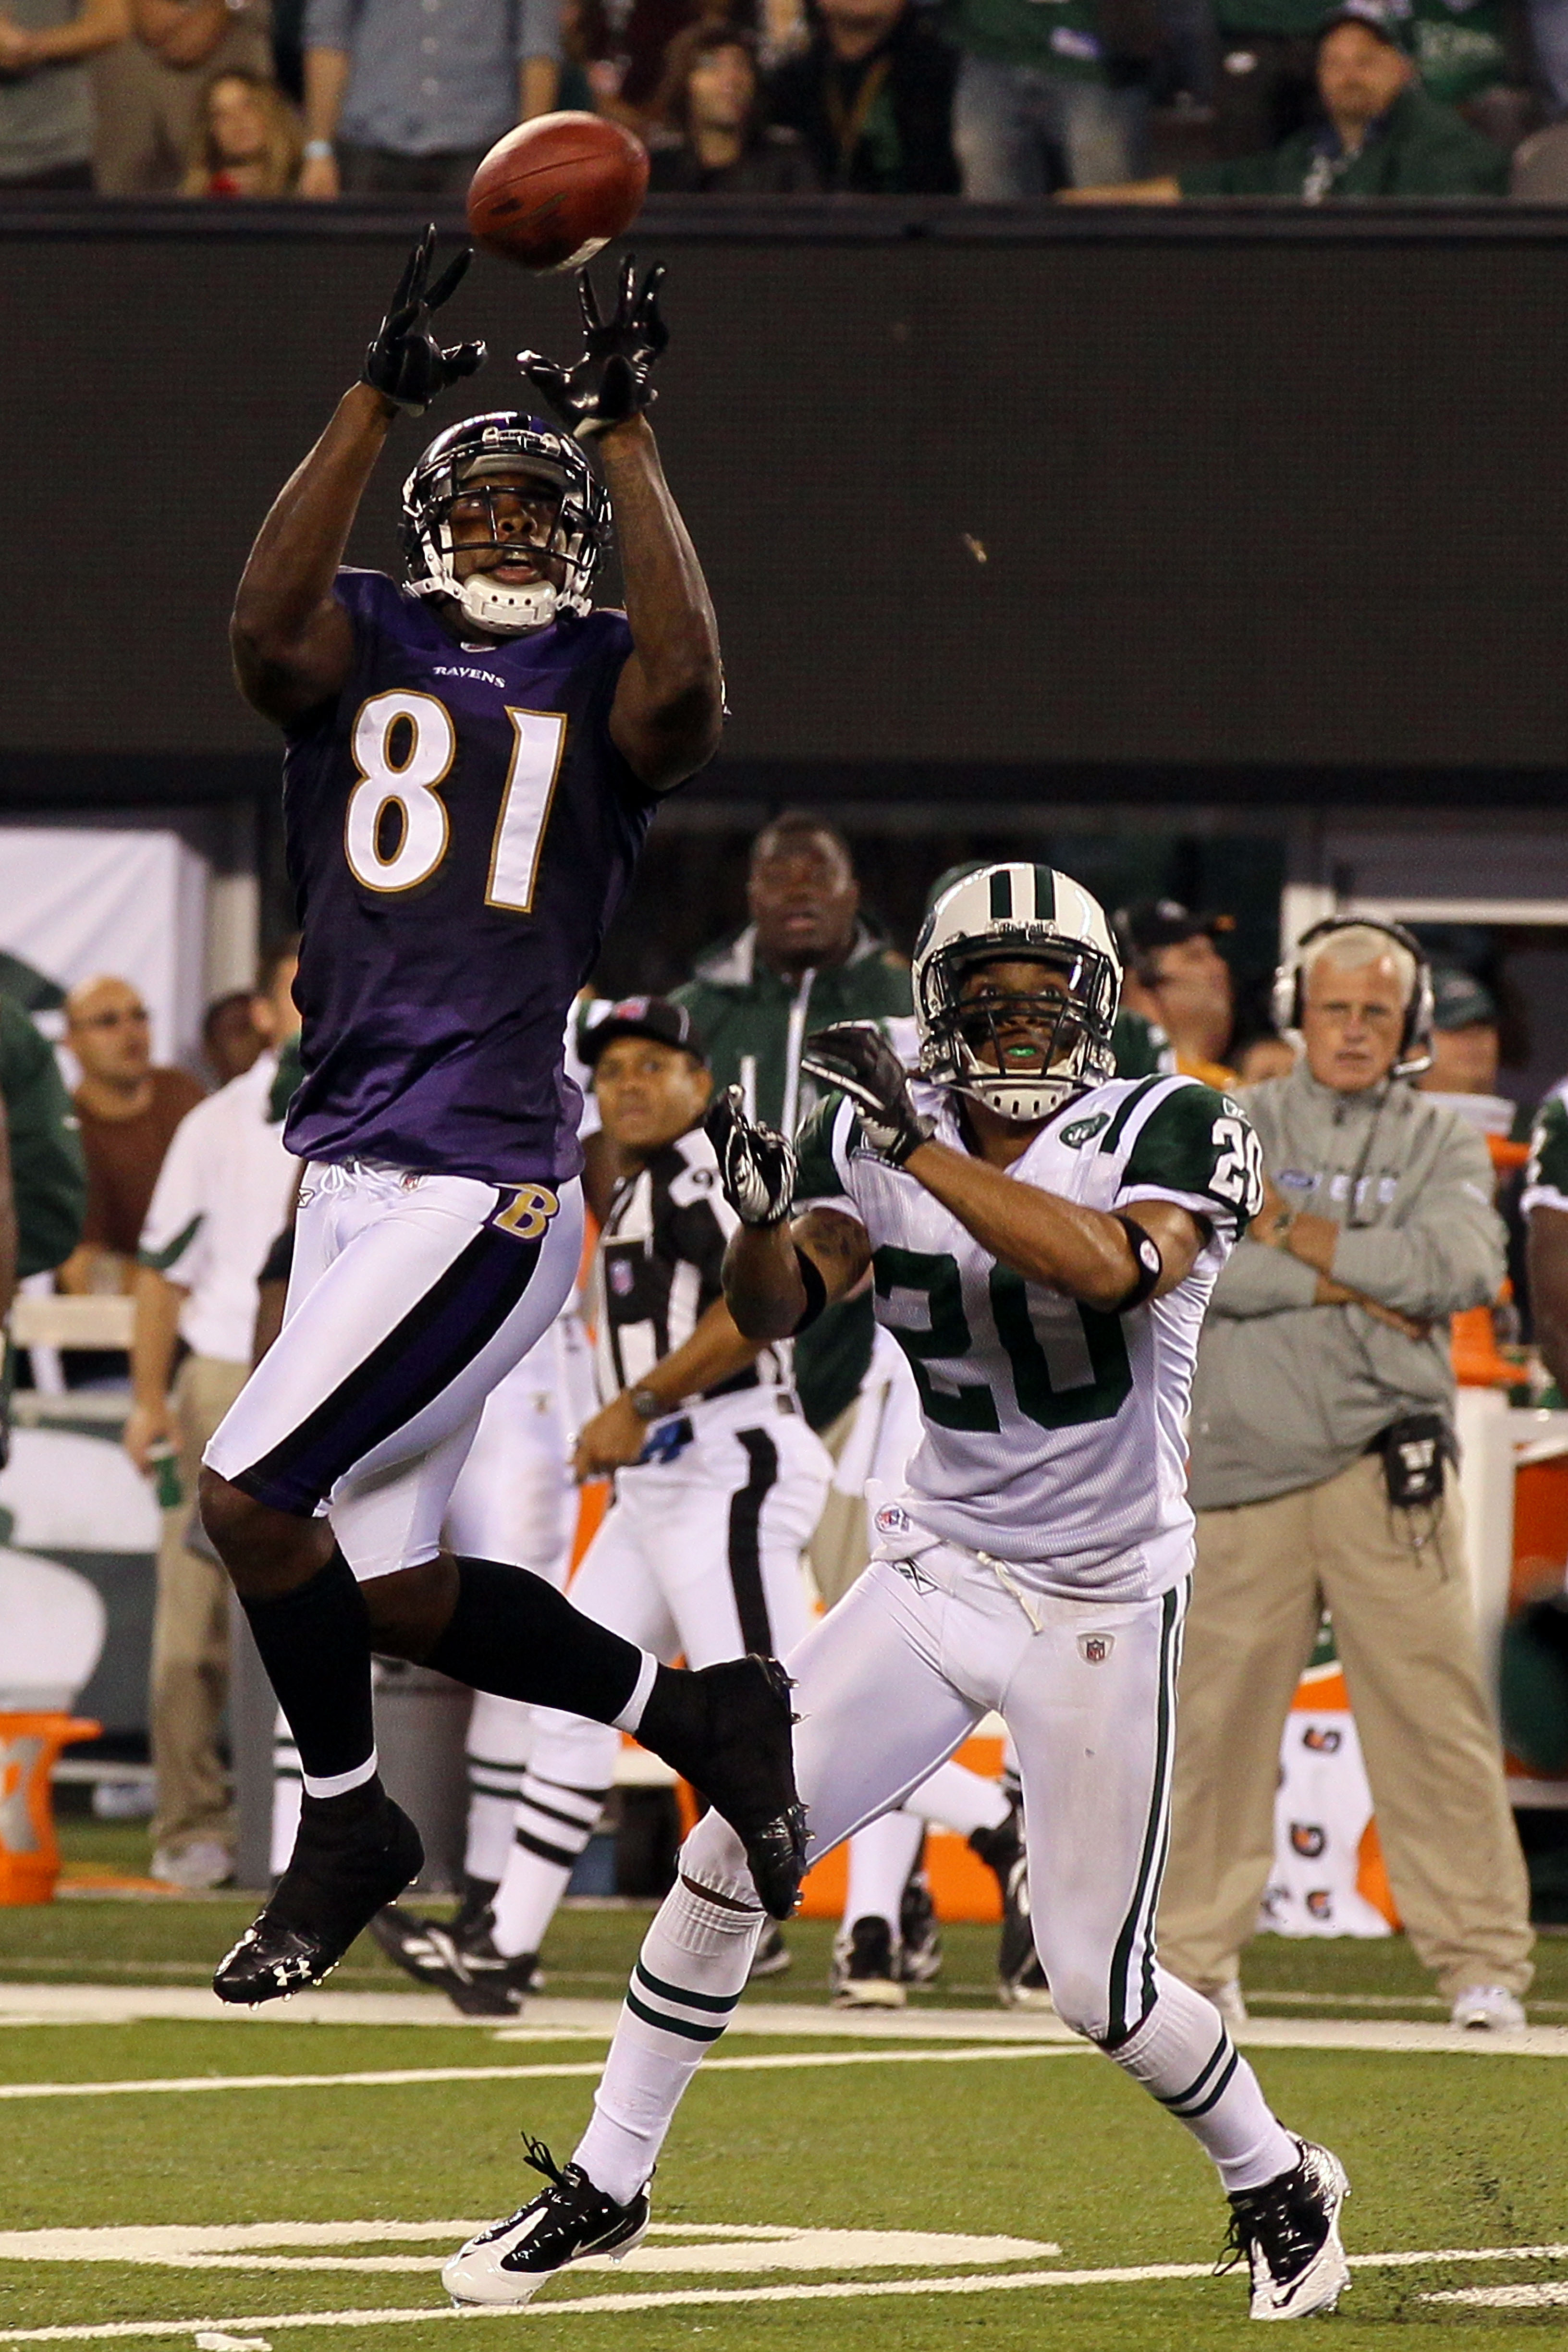 EAST RUTHERFORD, NJ - SEPTEMBER 13:  Anquan Boldin #81 of the Baltimore Ravens catches a pass over Kyle Wilson #20 of the New York Jets during their home opener at the New Meadowlands Stadium on September 13, 2010 in East Rutherford, New Jersey.  (Photo b